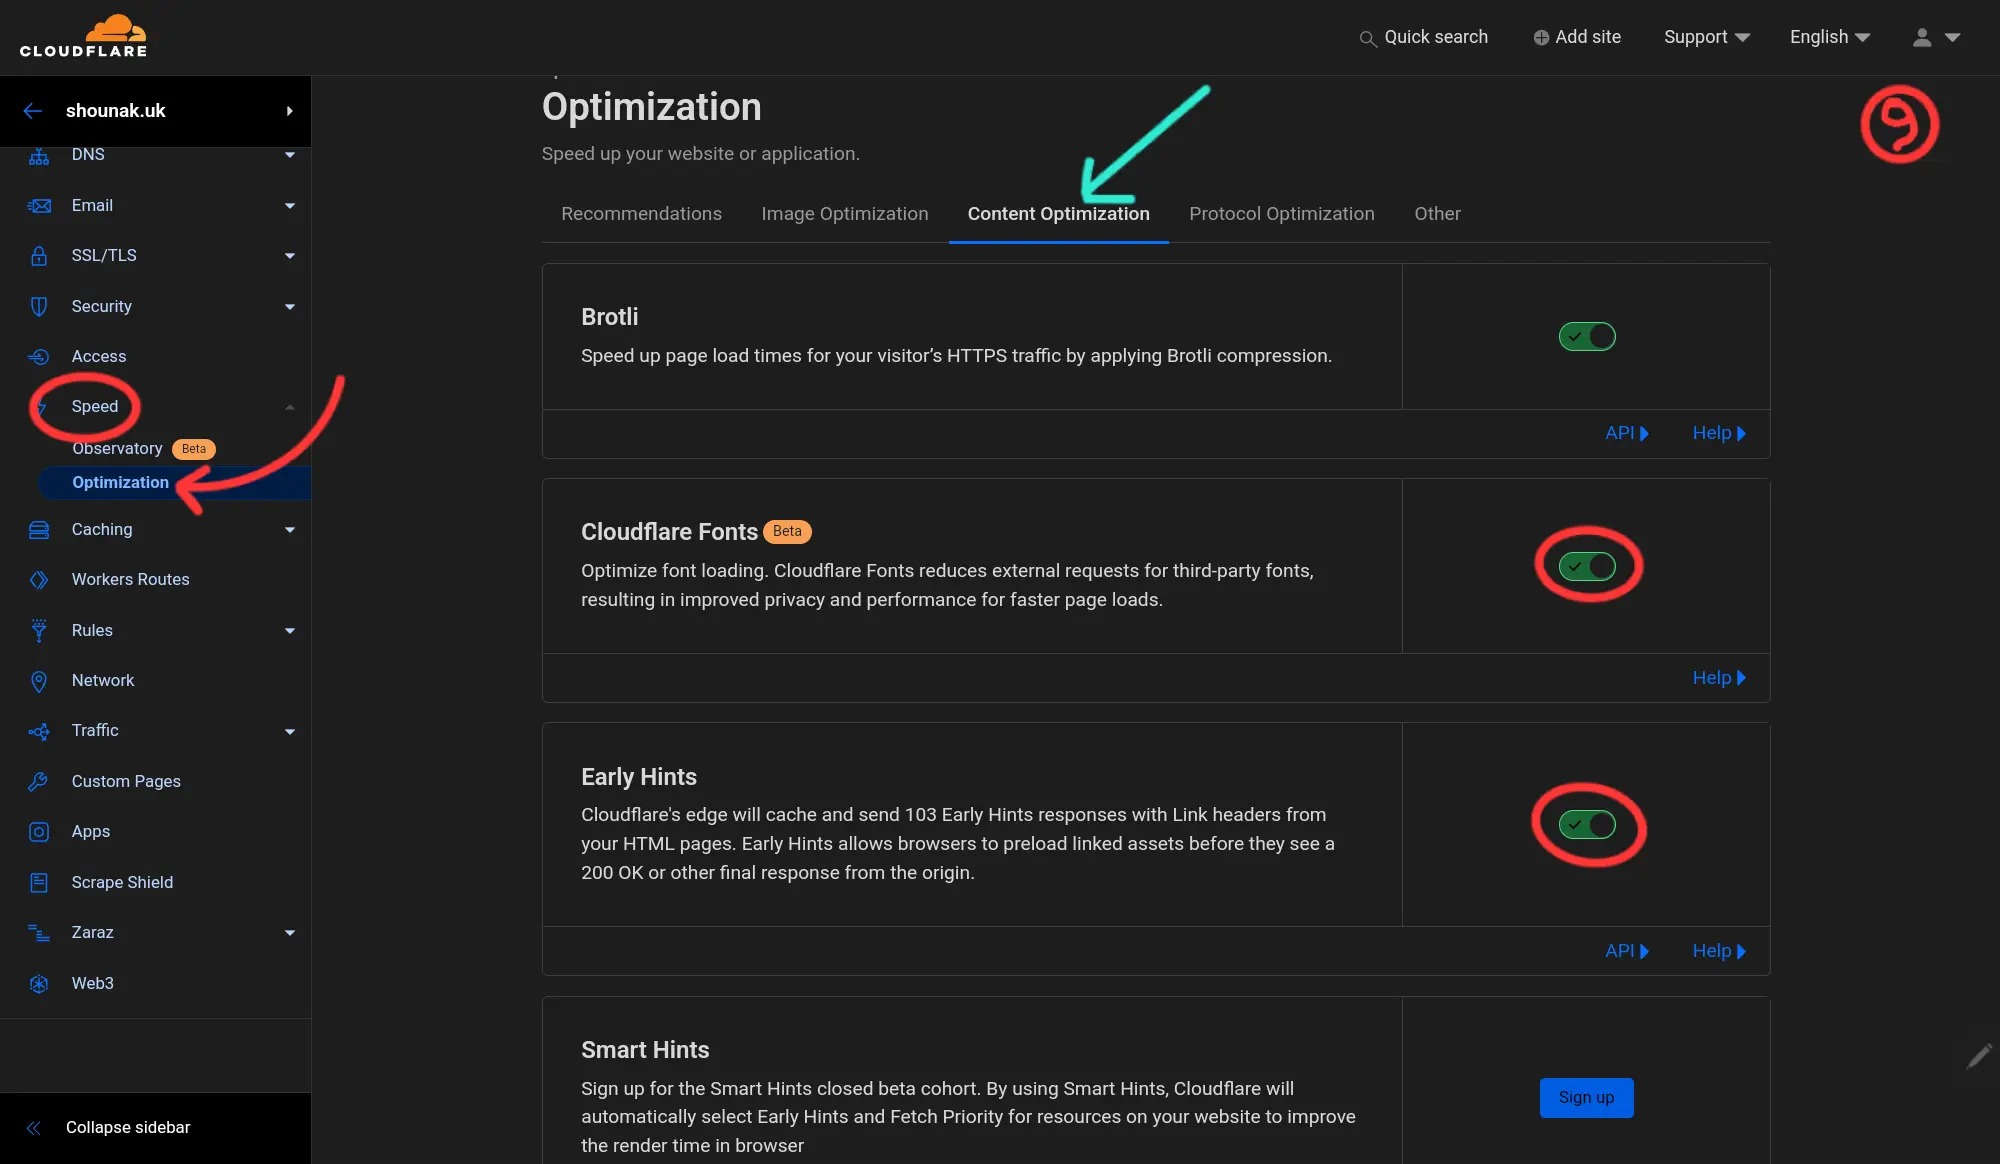 Content optimization in Cloudflare page 1